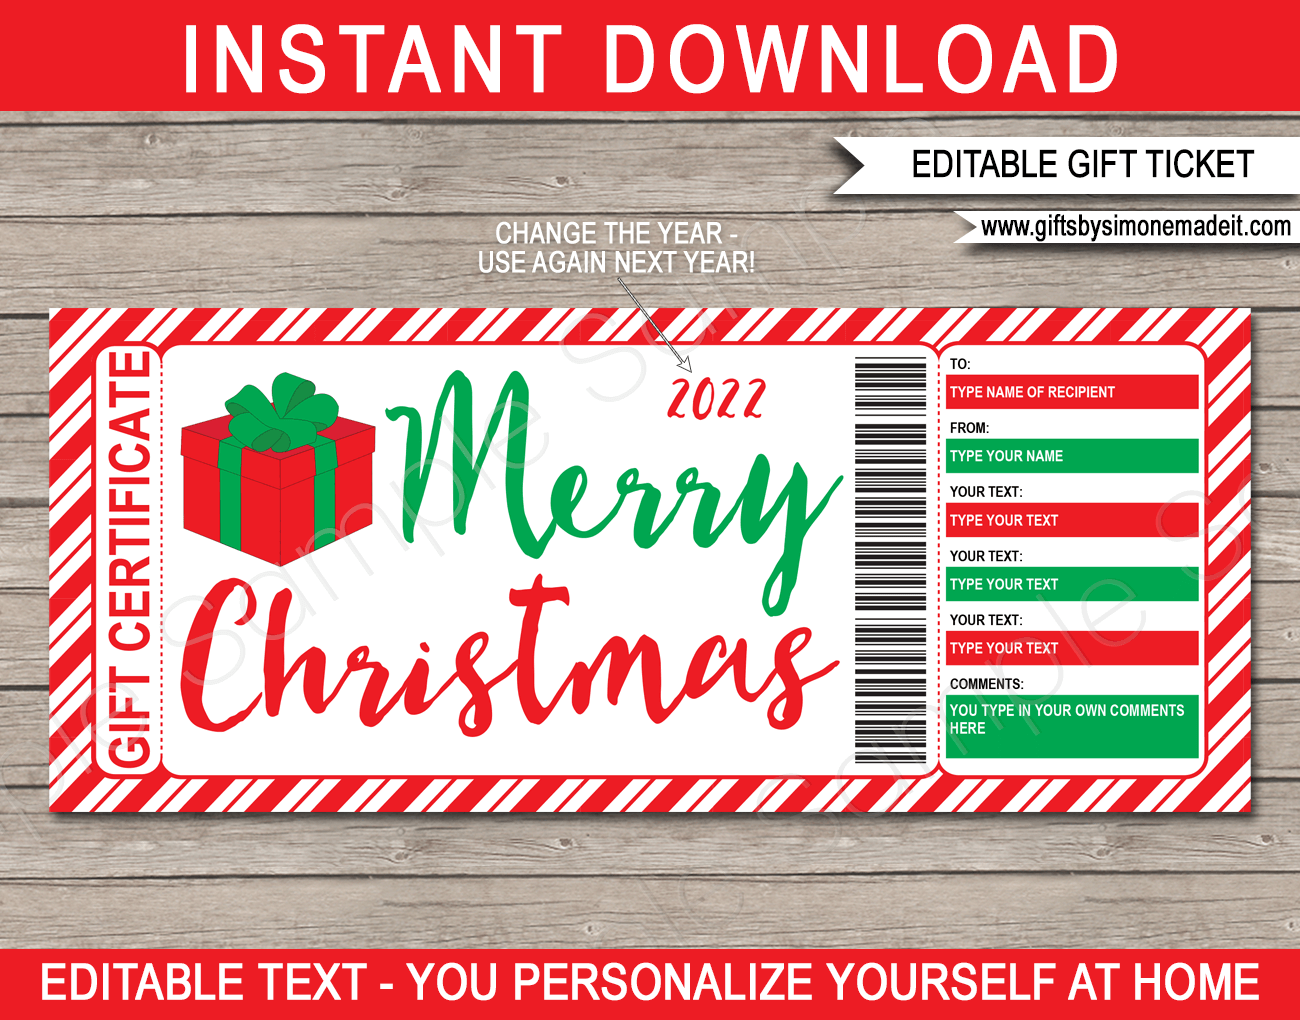 Christmas Gift Certificate Template | Editable & Printable Gift Vouchers | Personalized Custom Gift Card | Instant Download via giftsbysimonemadeit.com